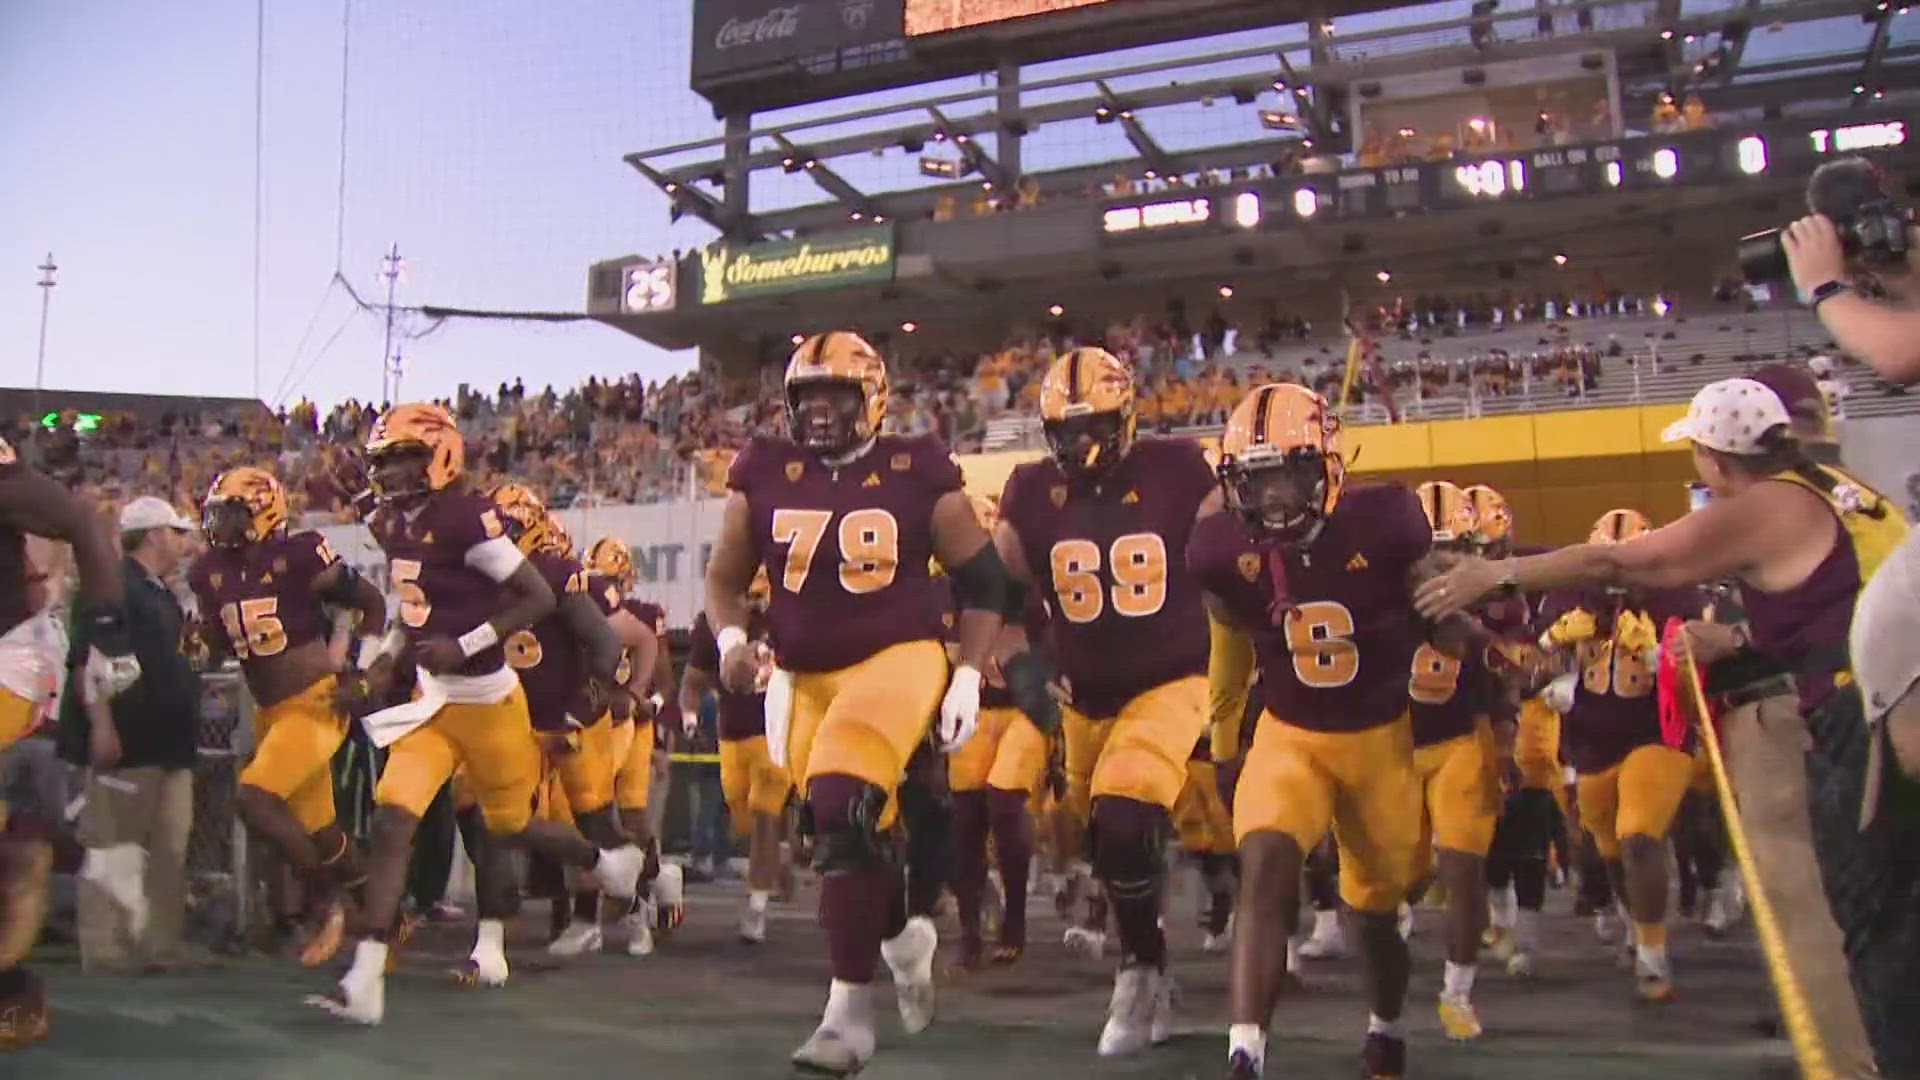 Arizona State Football Uniforms Bring the Heat to the Field